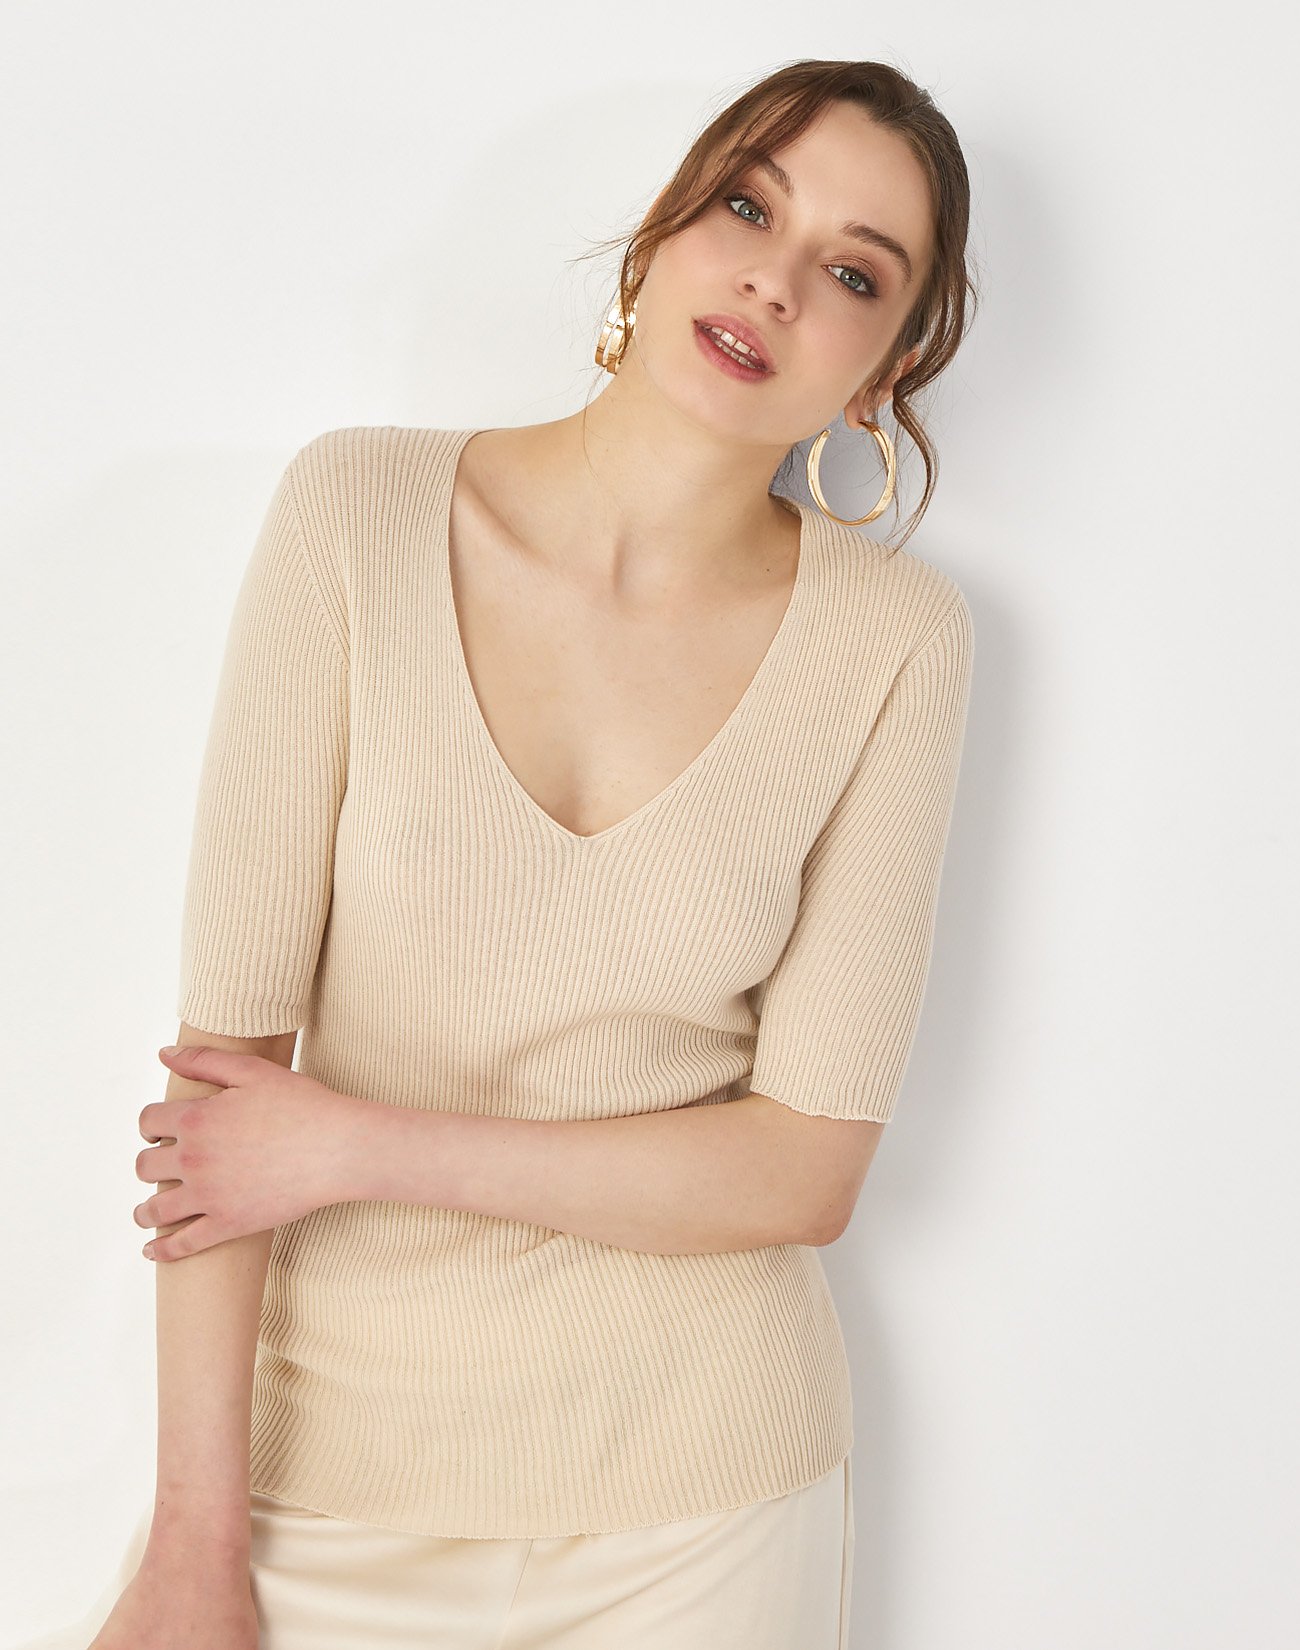 Ribbed knit sweater